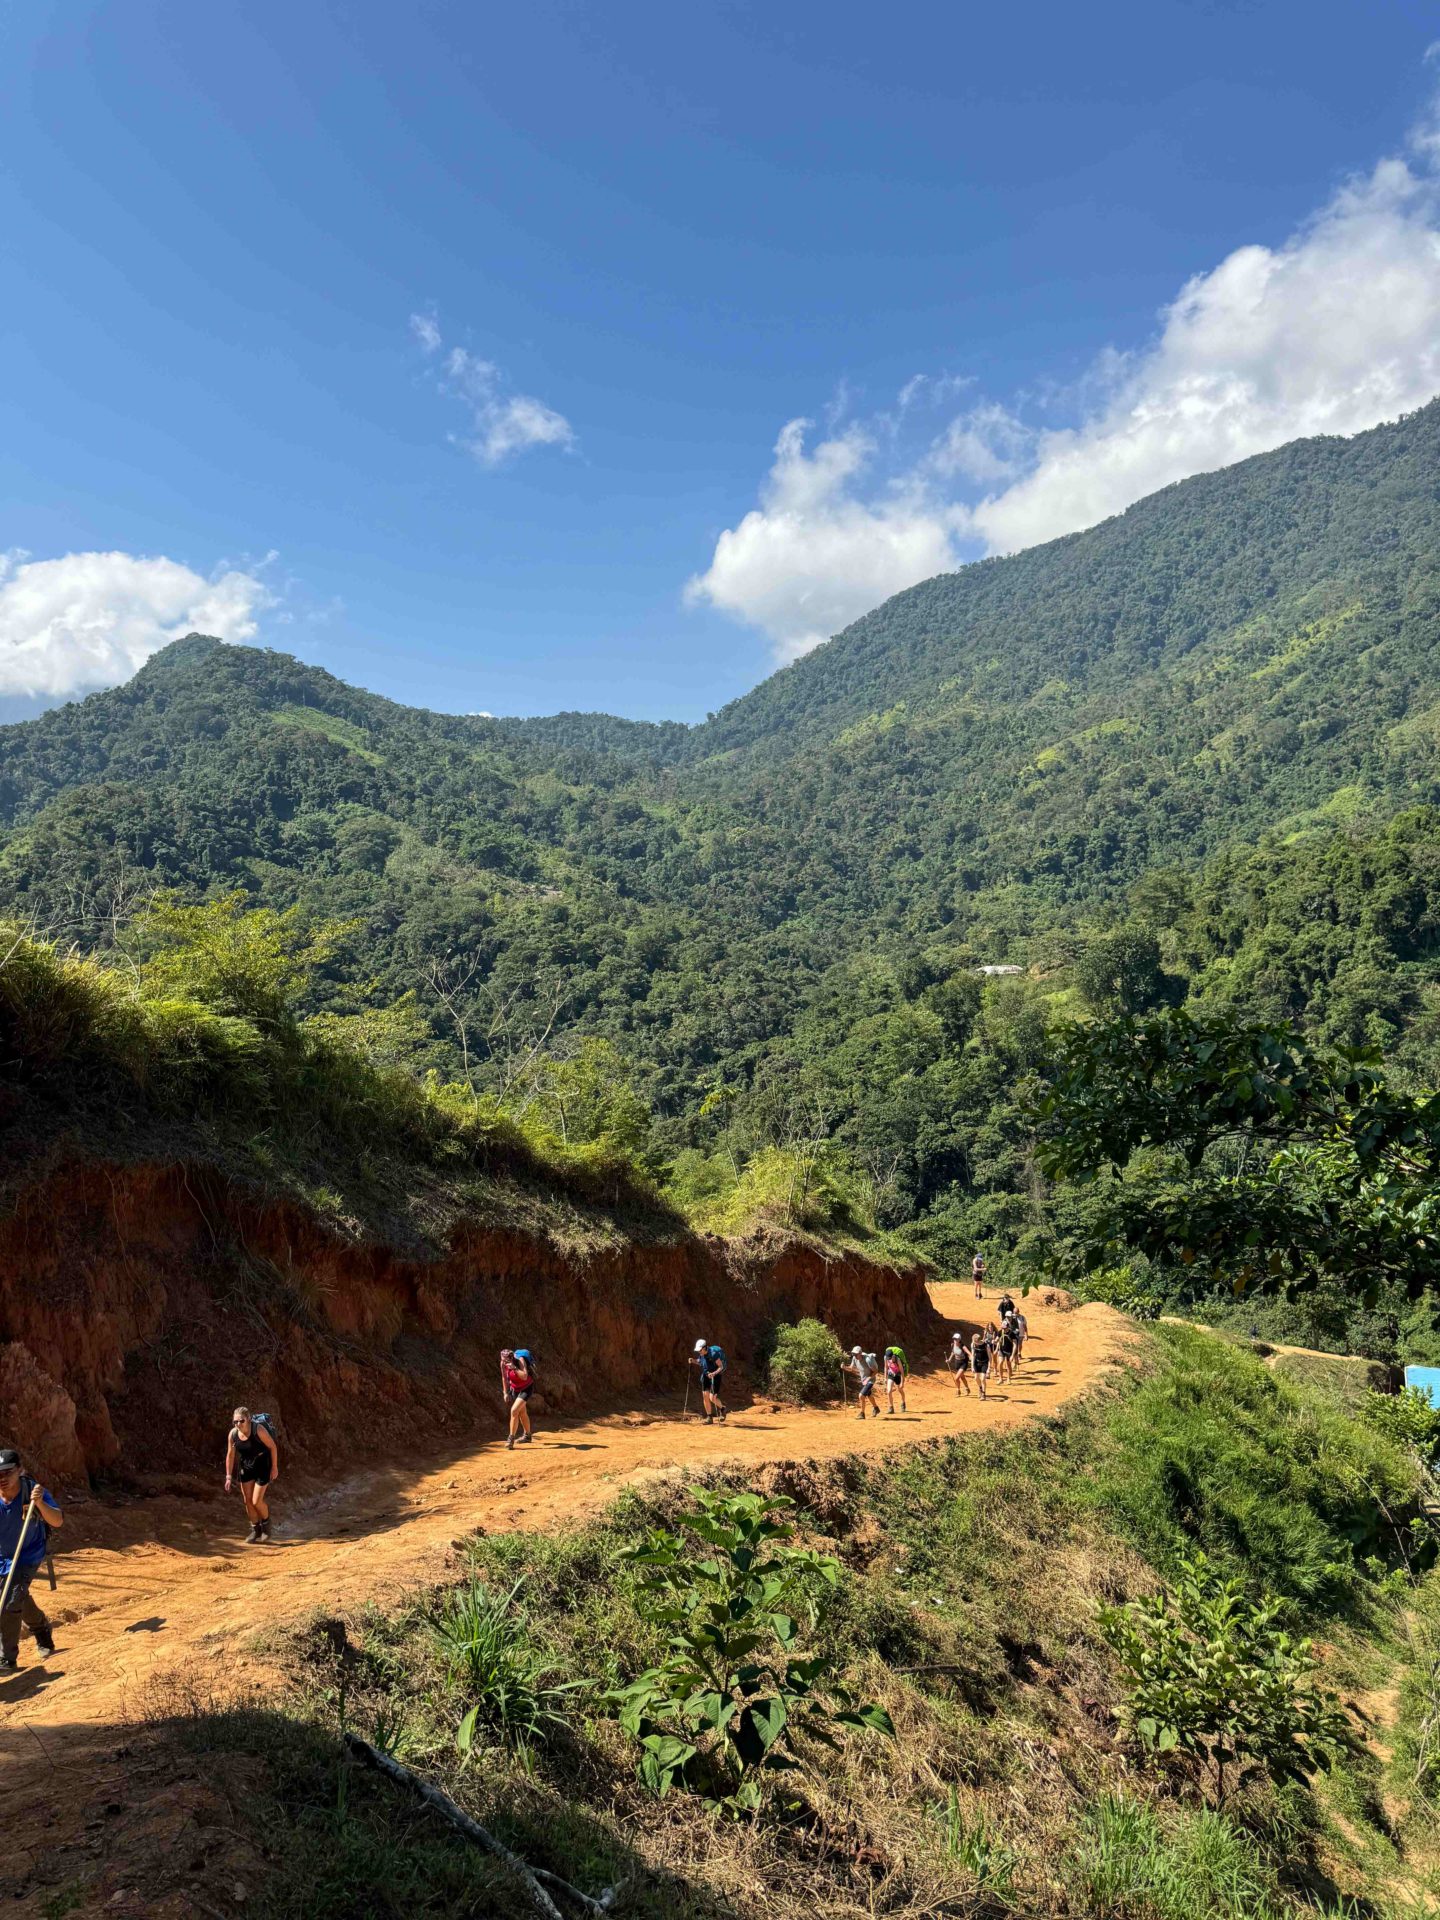 Guests hiking along the Lost City Trek in Colombia